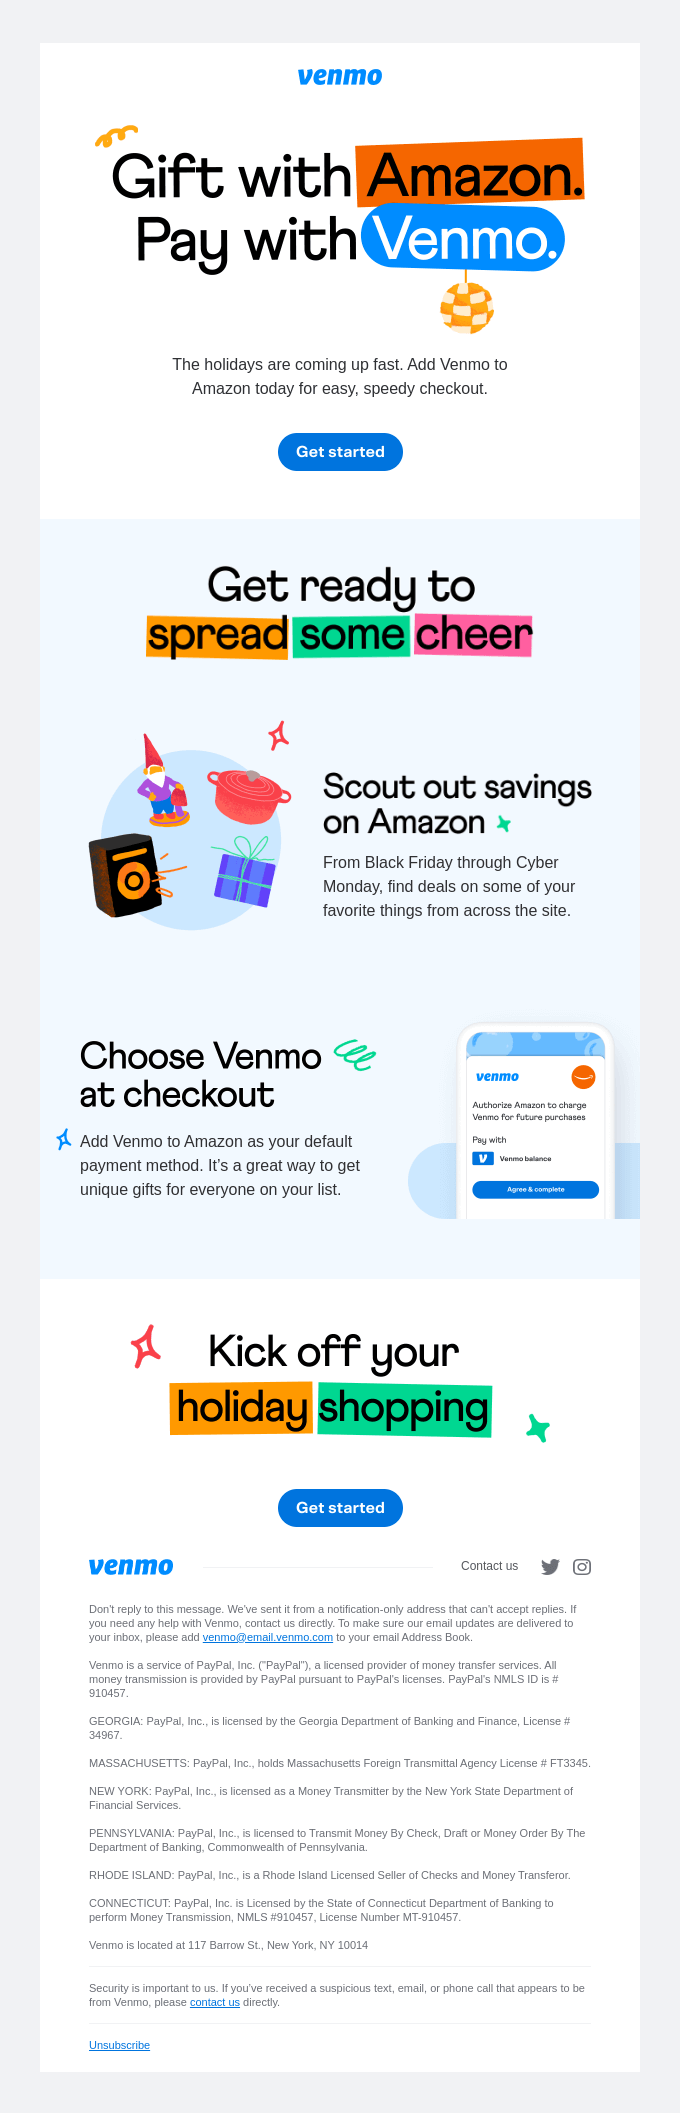 Just in time: Add Venmo to Amazon for all your holiday shopping